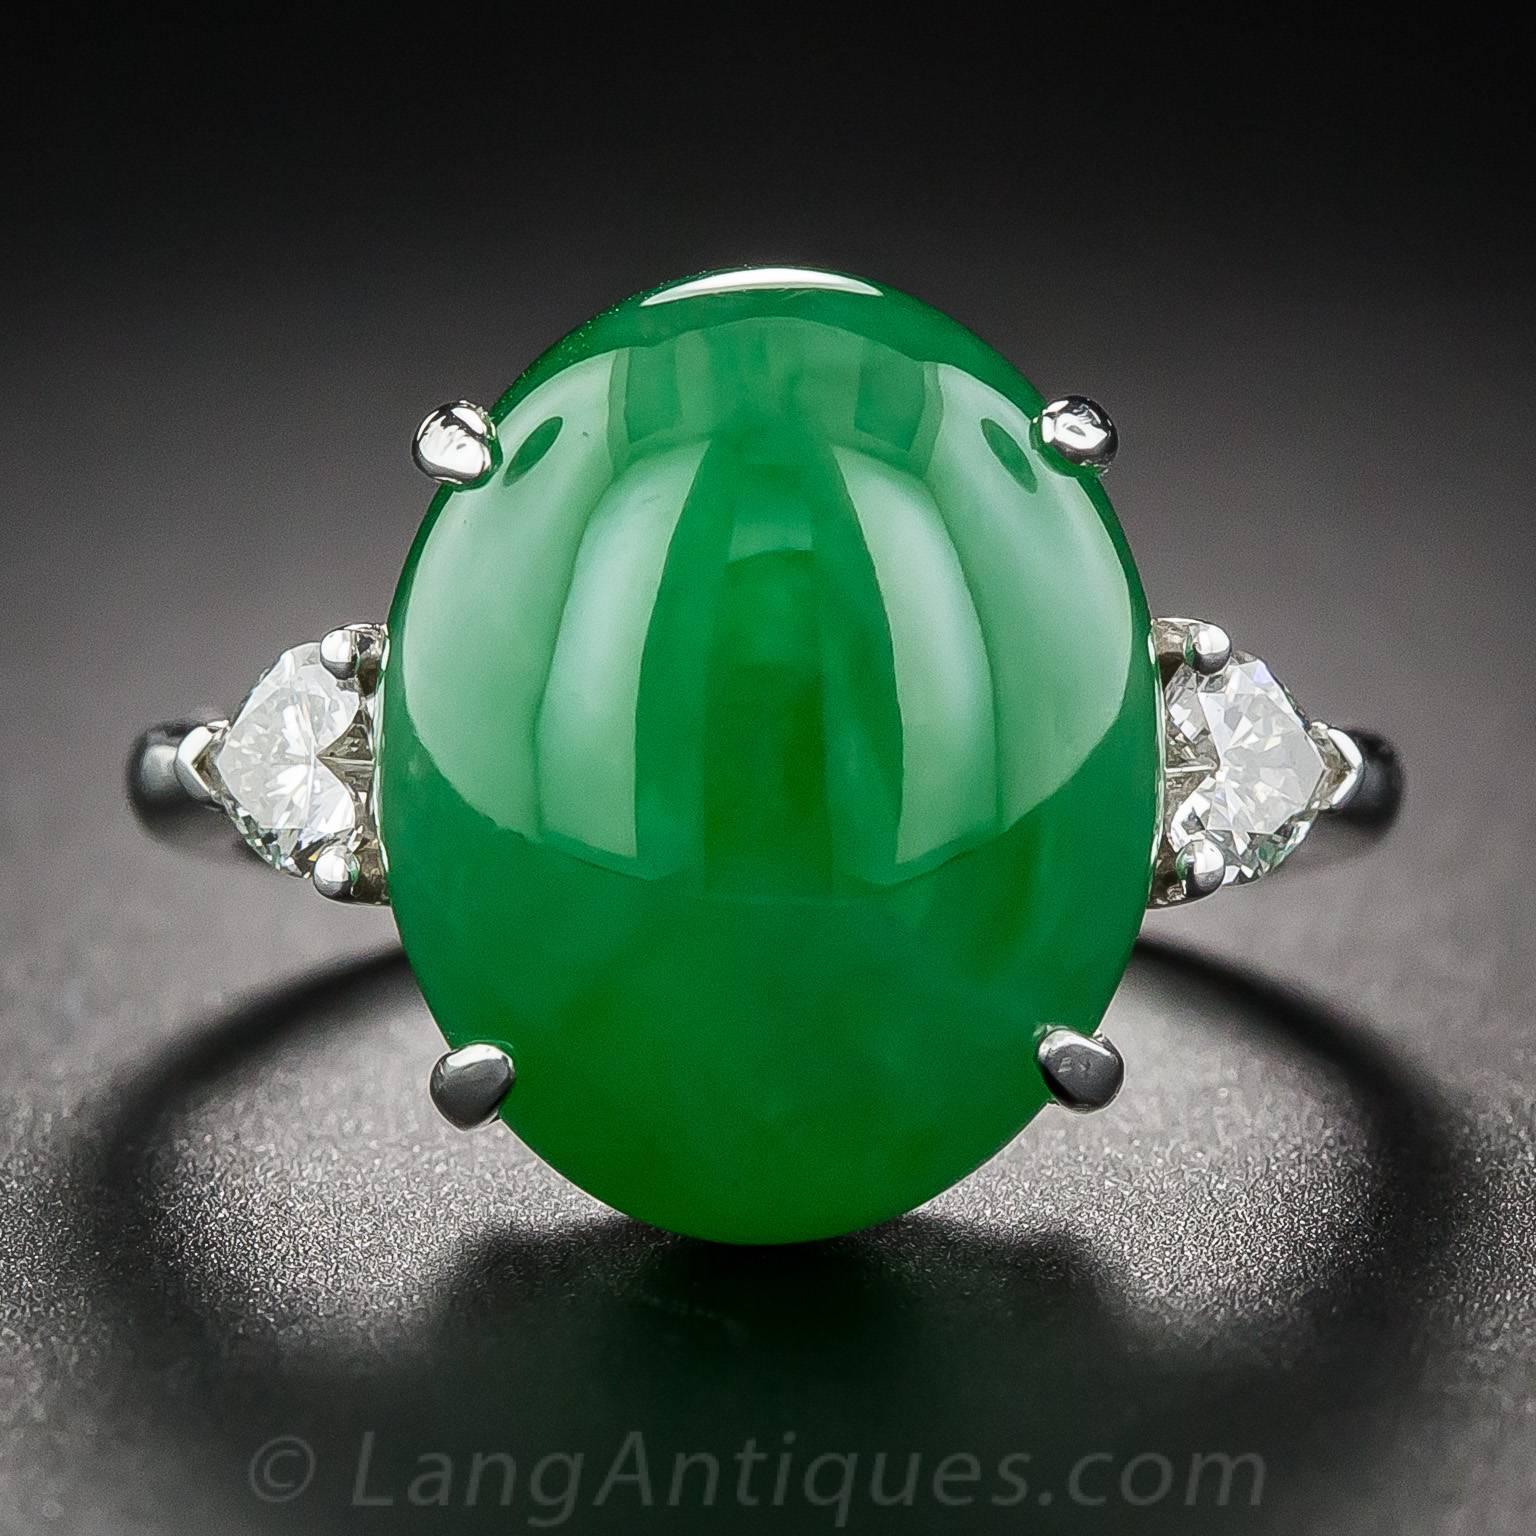 A luscious, rich, bright deep apple-green, translucent natural jadeite gumdrop glows from between a pair of sparkling heart shape diamonds in this colorful classic, crafted in bright 18K white gold. 

The jade is accompanied by a gemological